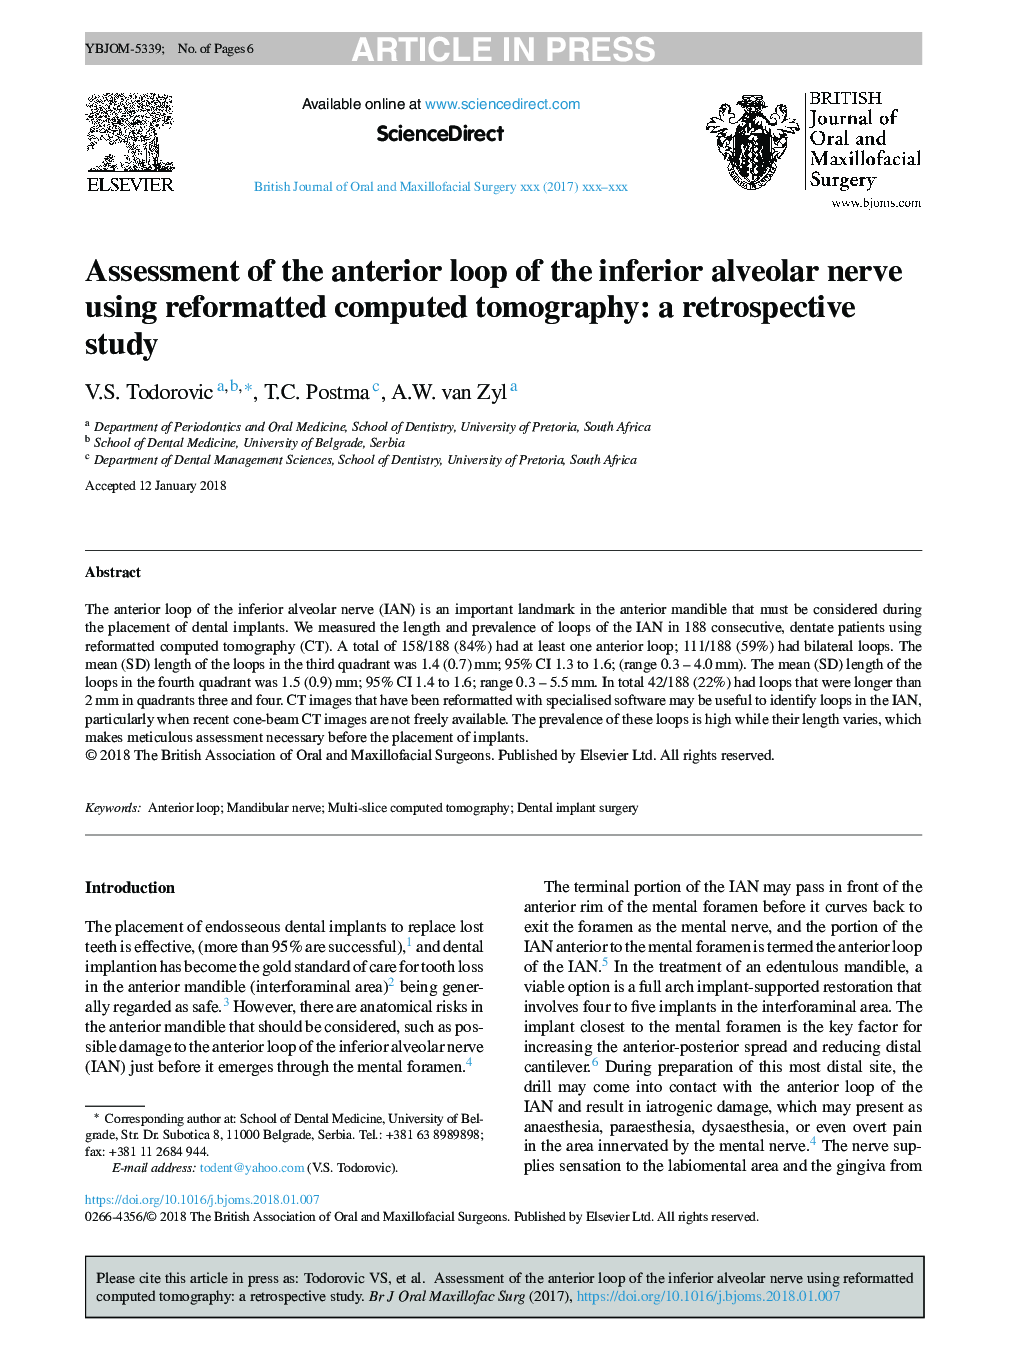 Assessment of the anterior loop of the inferior alveolar nerve using reformatted computed tomography: a retrospective study